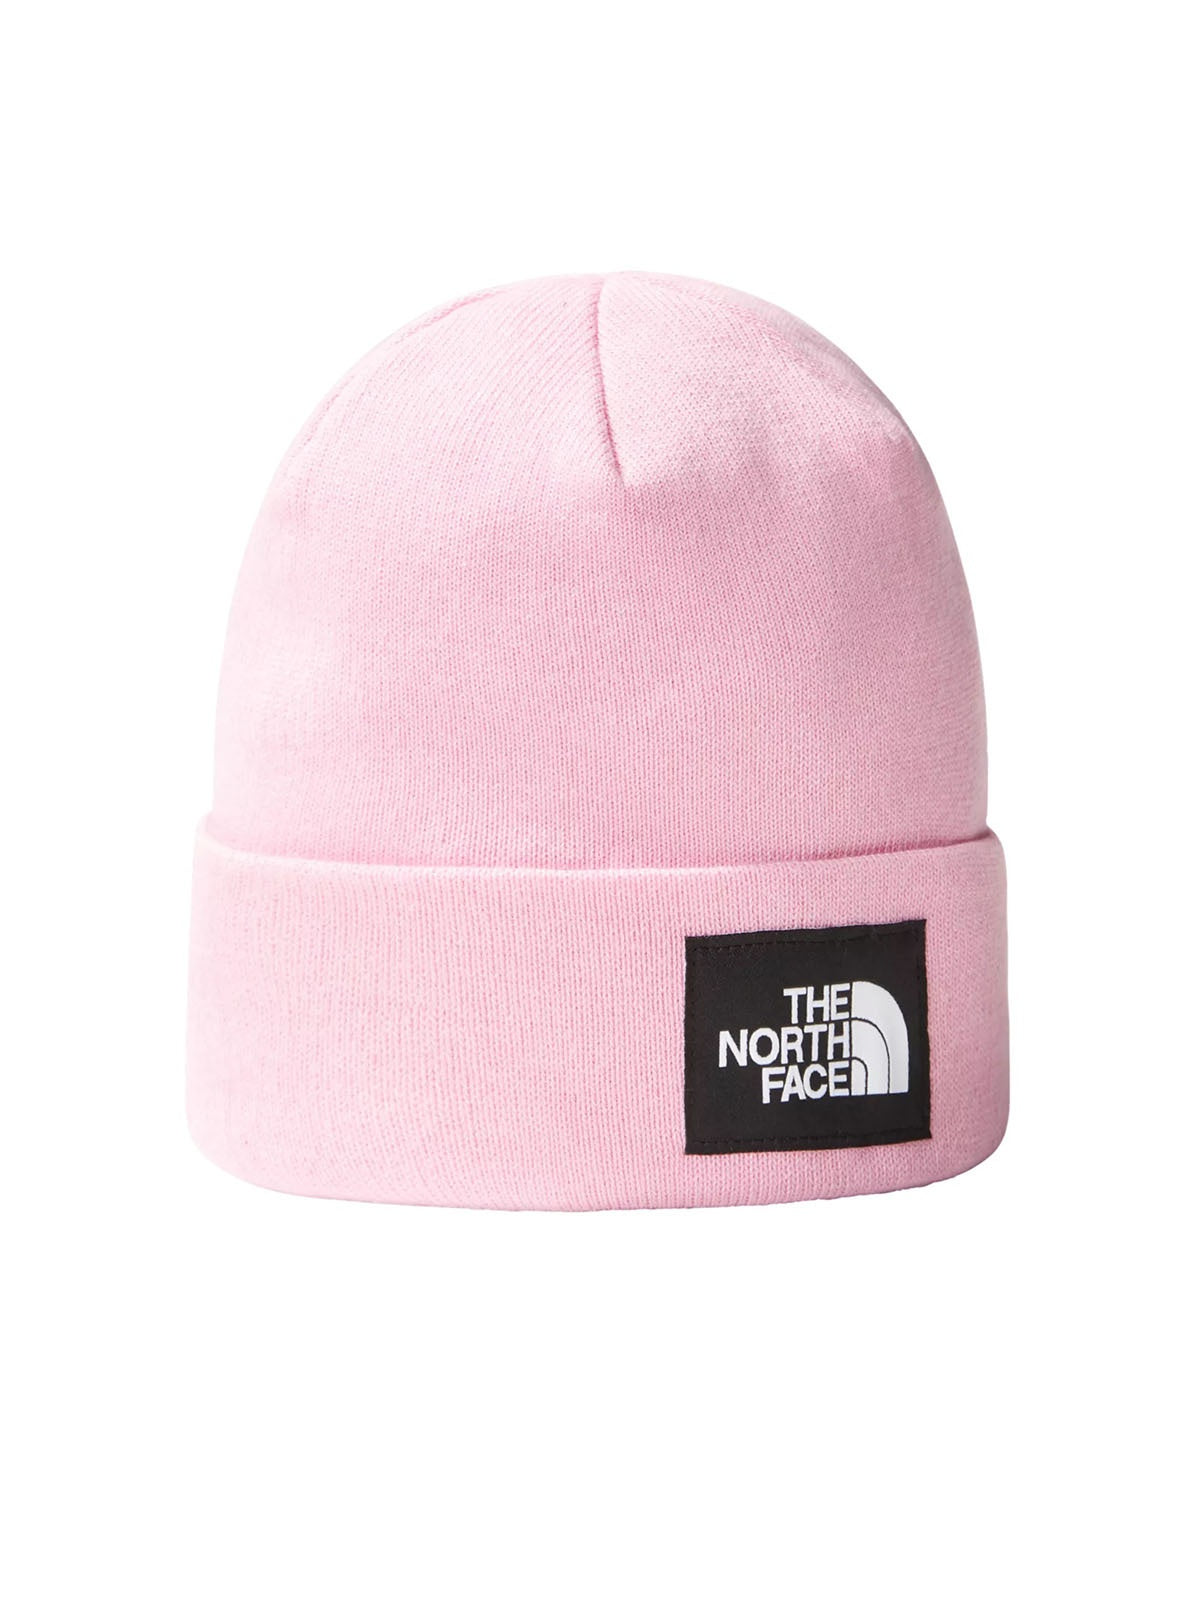 Berretti in maglia Unisex The North Face - Dock Worker Recycled Beanie - Rosa